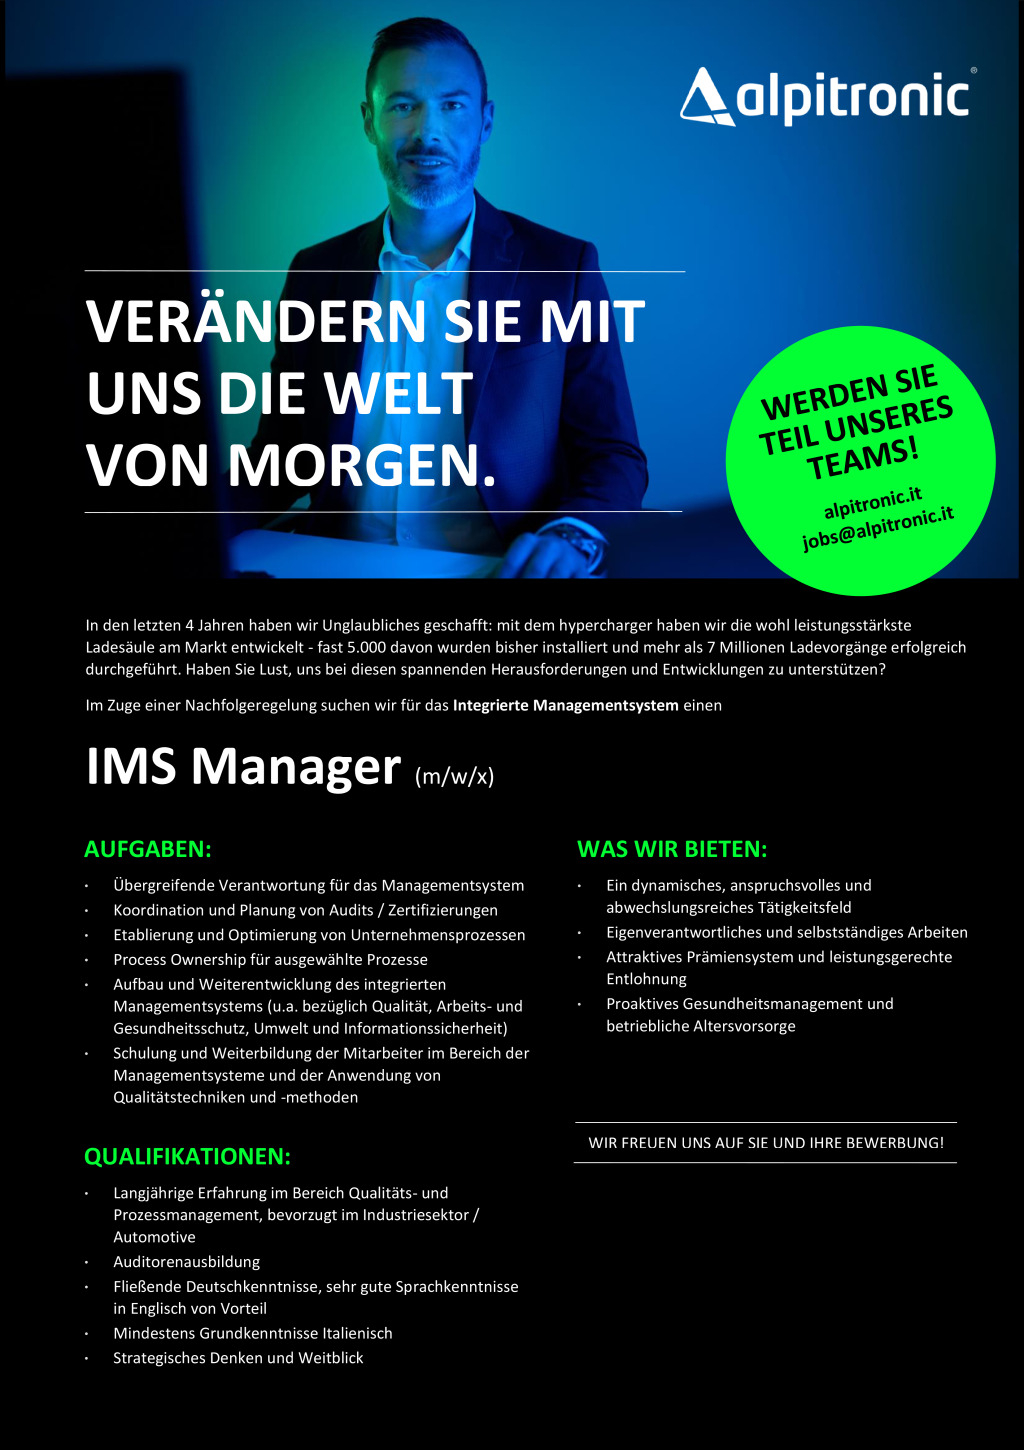 IMS Manager (w/m/x)